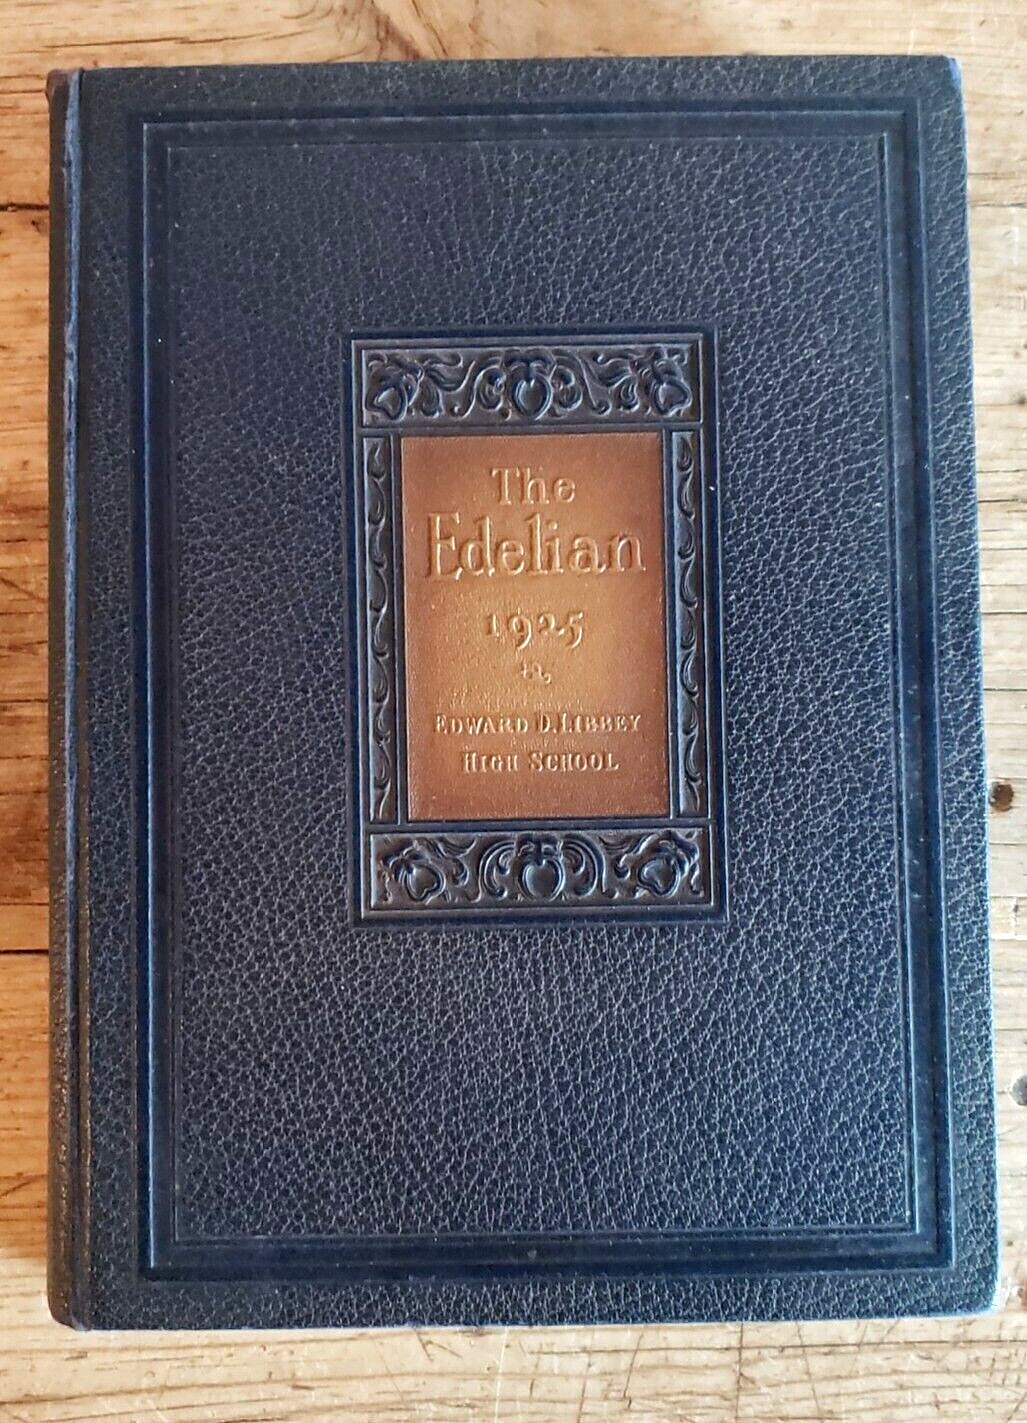 Yearbook 1925 Edward Drummond Libbey High School Vintage The Edelian Hard Cover